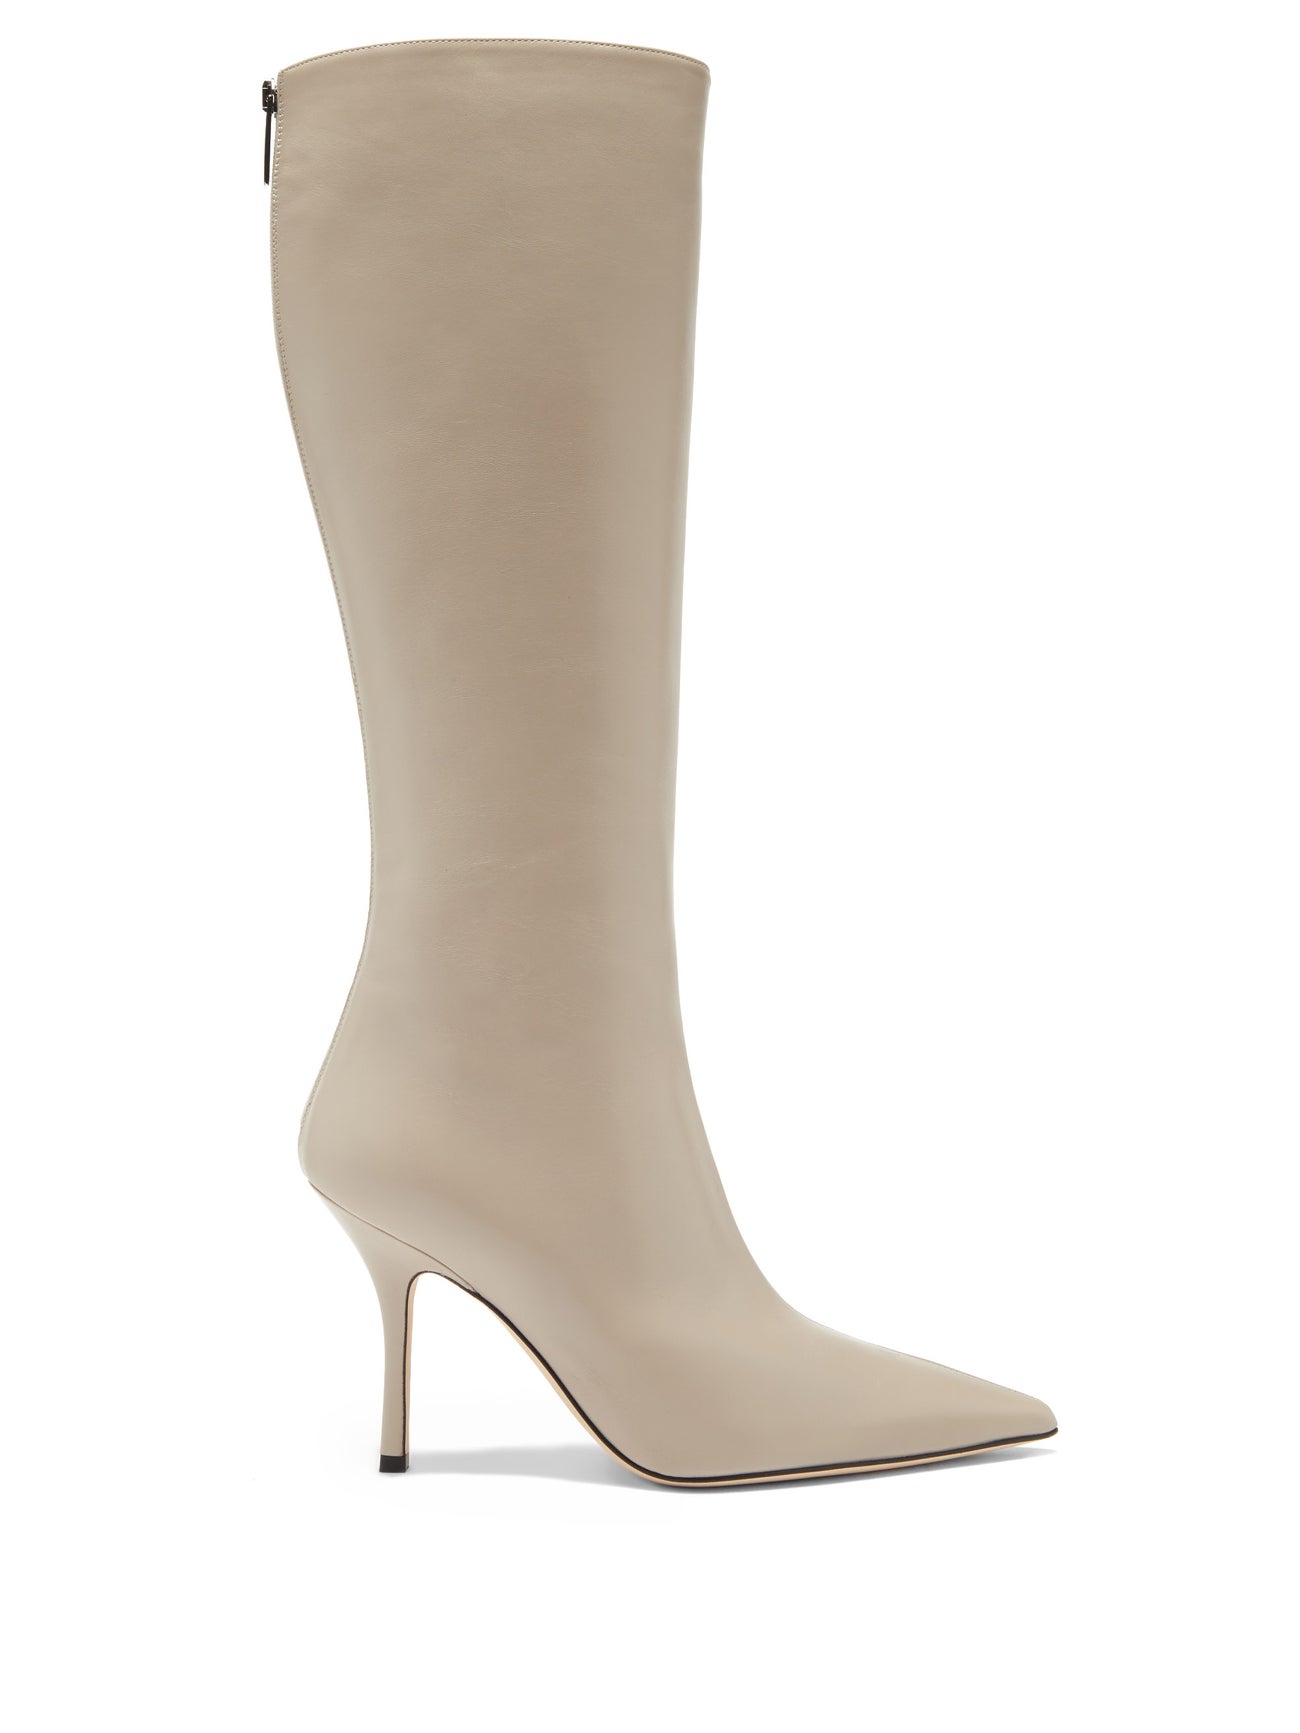 Paris Texas Mama Knee-High Leather Boots